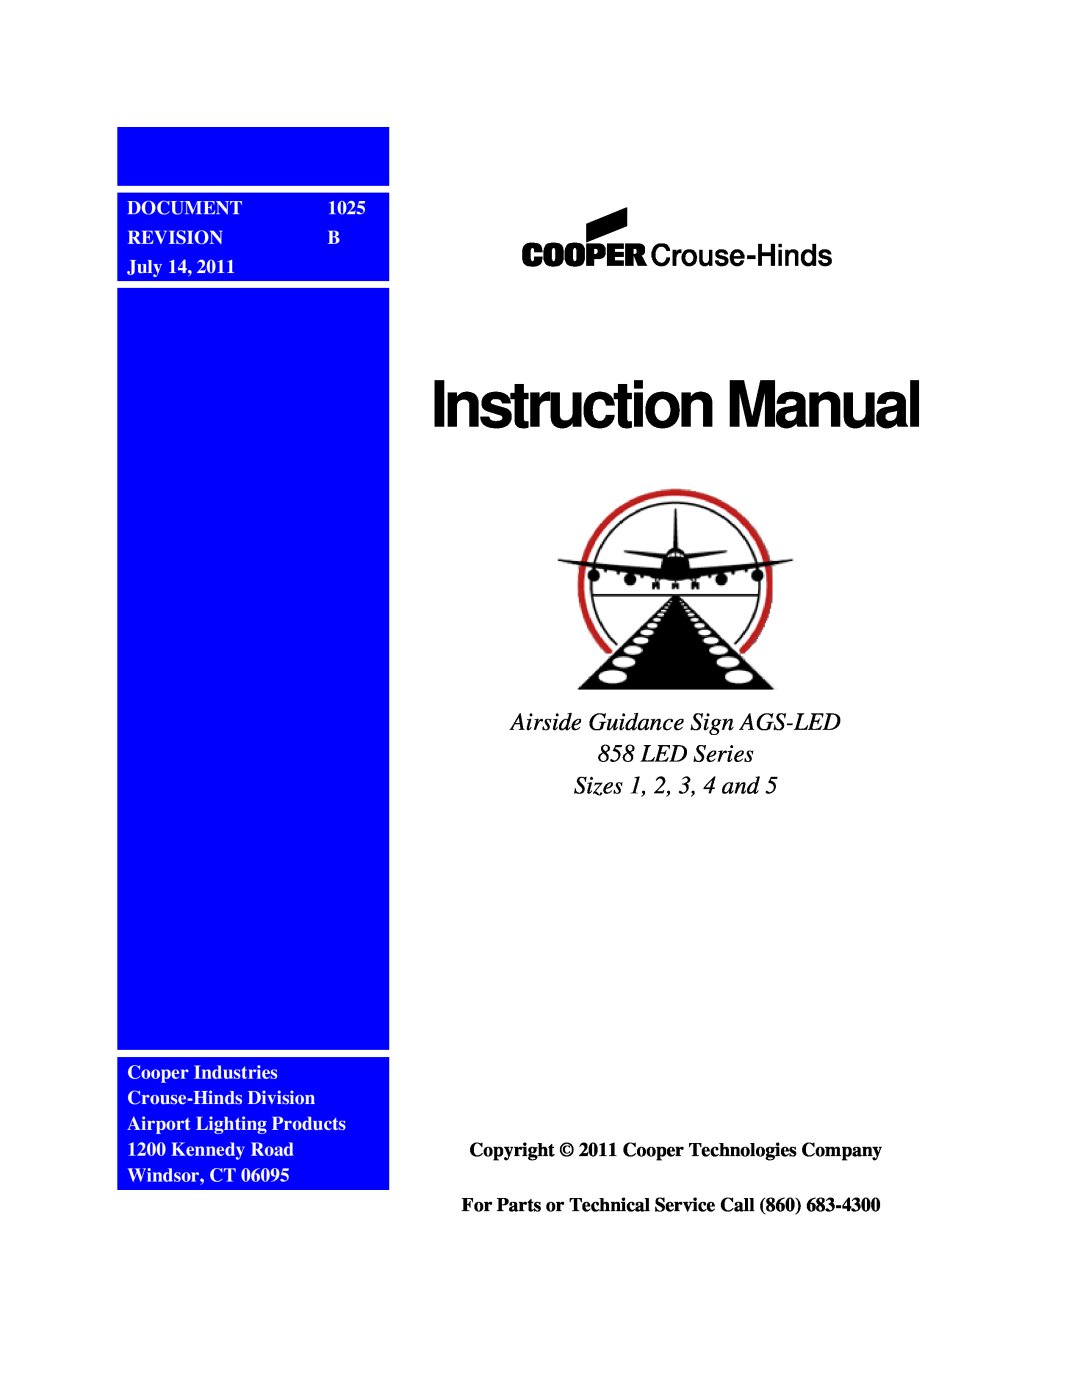 Cooper Bussmann instruction manual Instruction Manual, Airside Guidance Sign AGS-LED 858 LED Series 